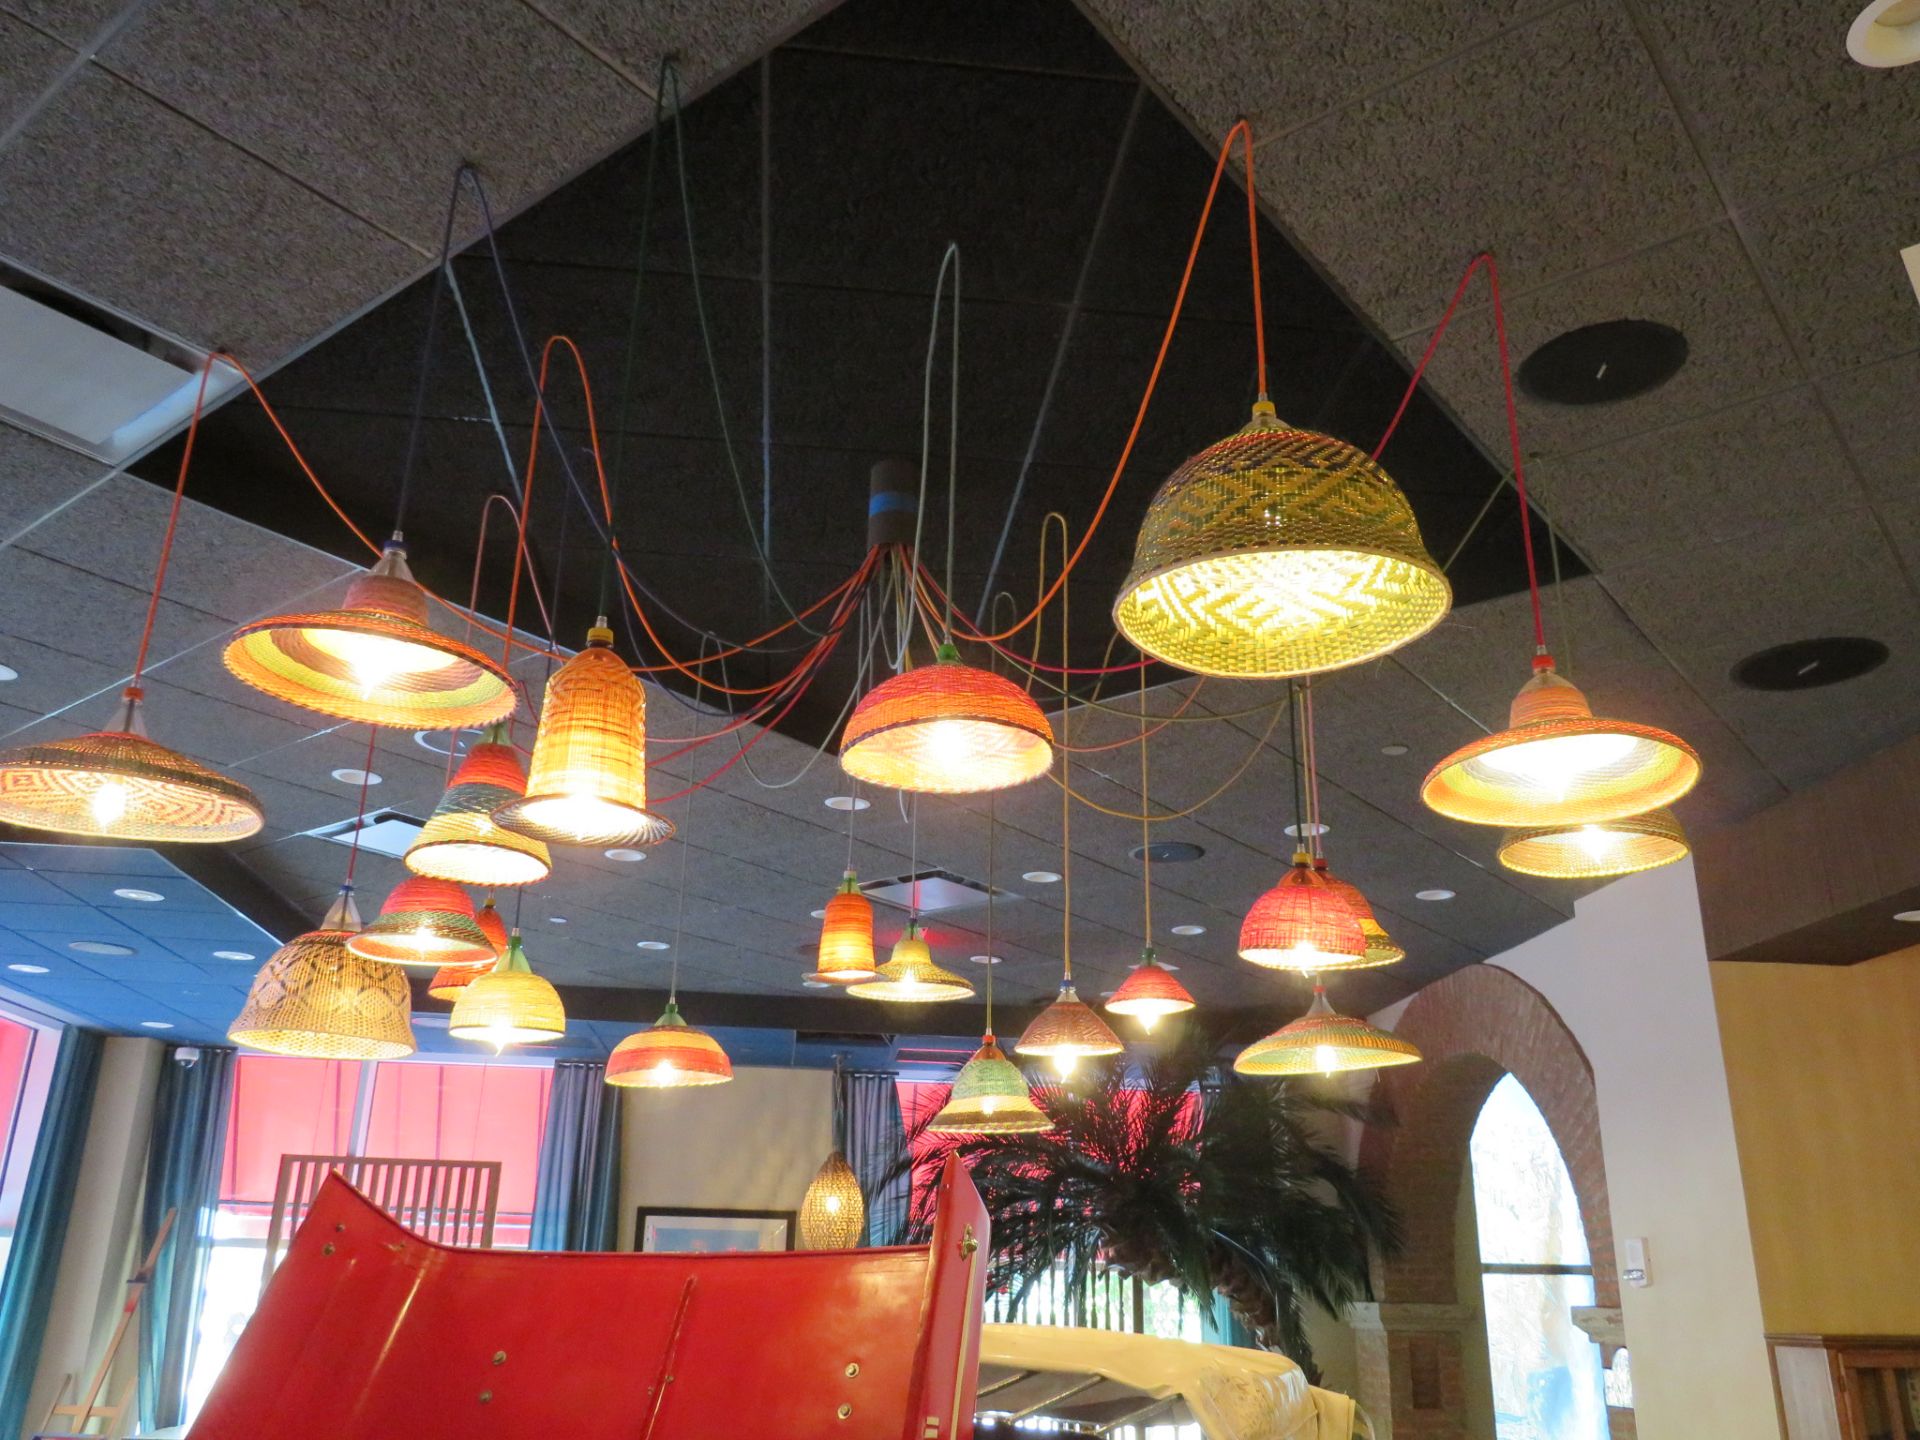 (Lot) Basket Chandeliers Over Jeep in Take Out Area